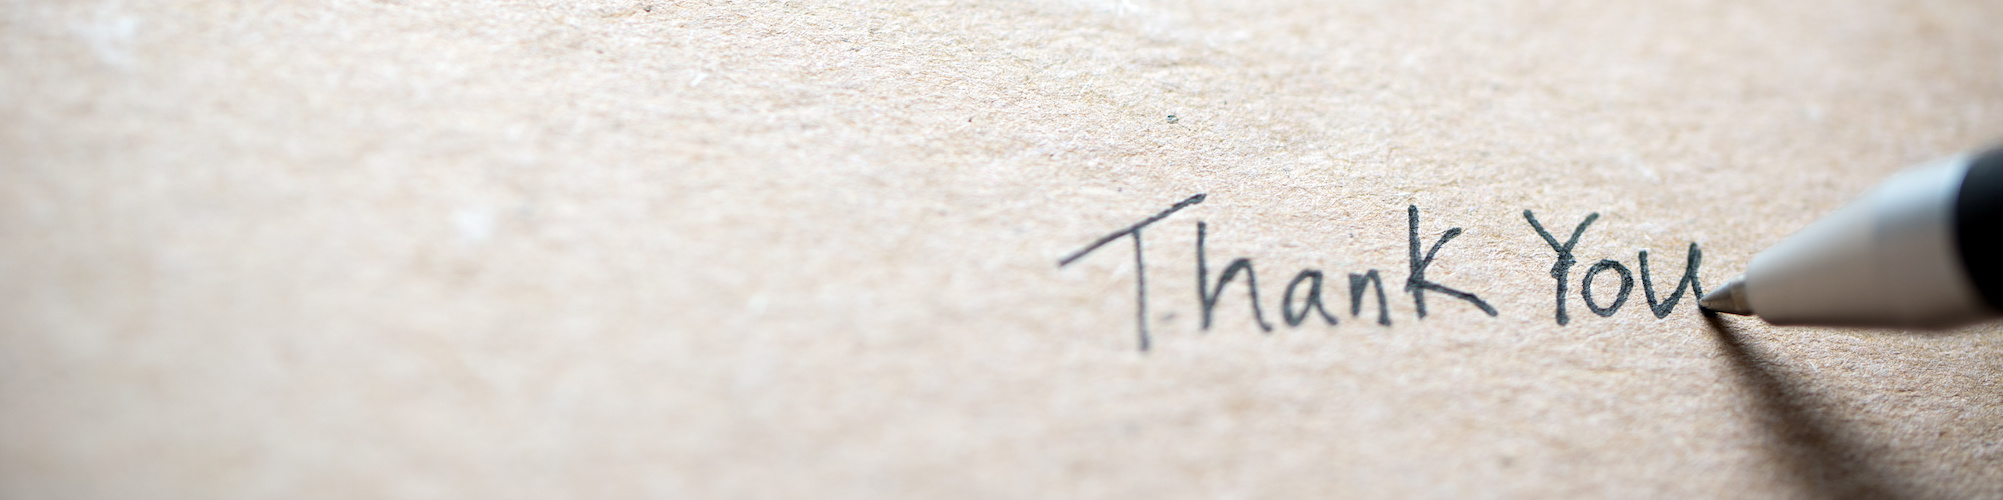 Using Gratitude to Build Your Business From Day One